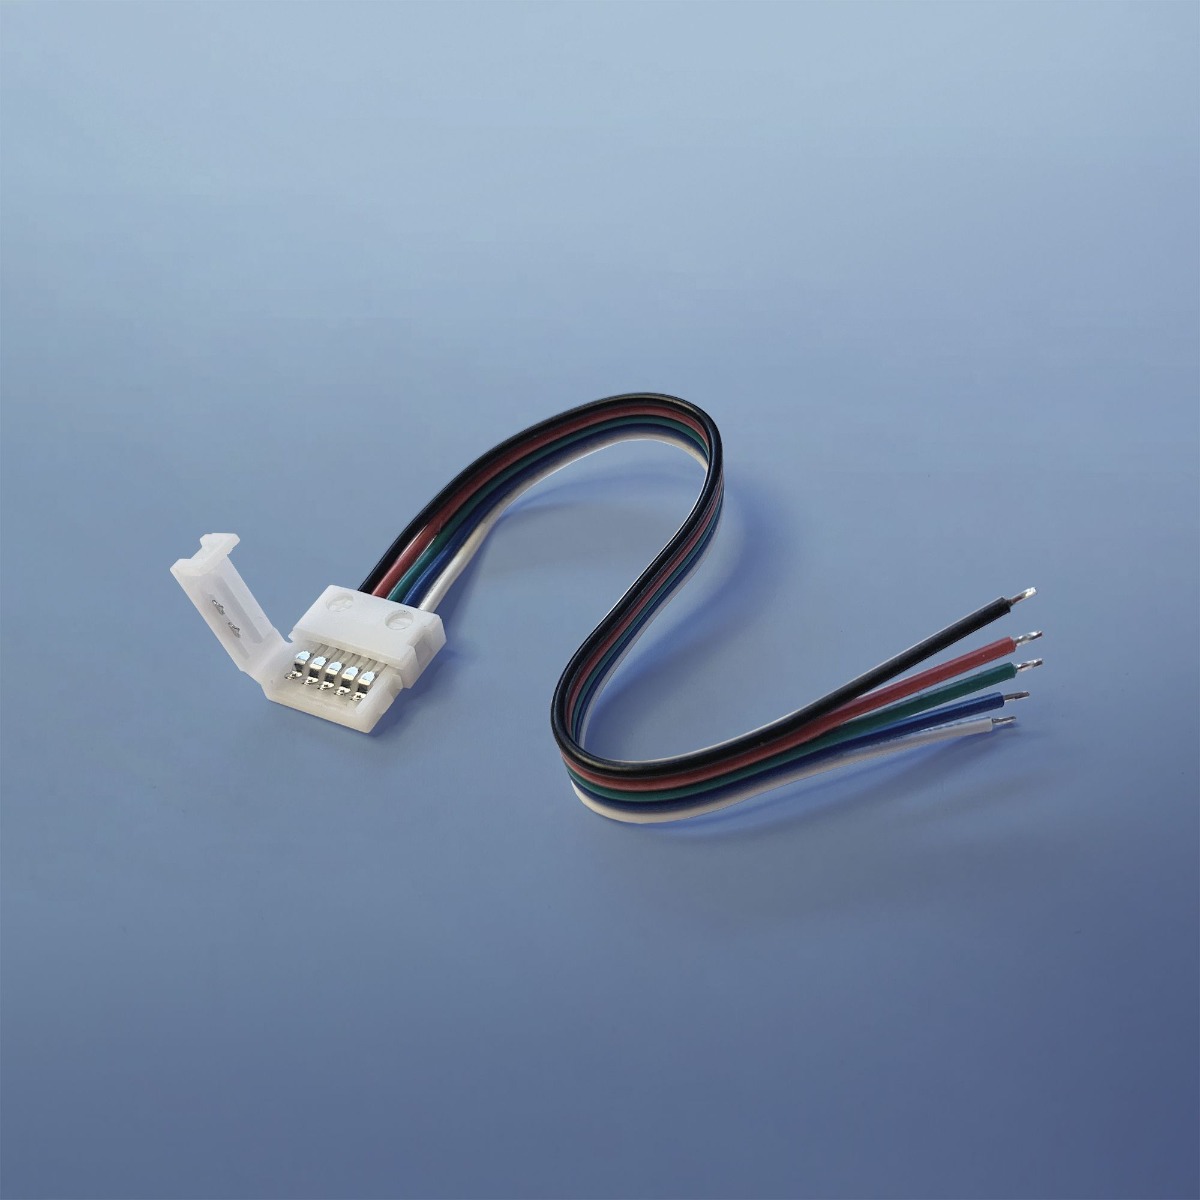 5.90" (15 cm) connecting cable for LumiFlex-RGB and RGBW LED Strips 